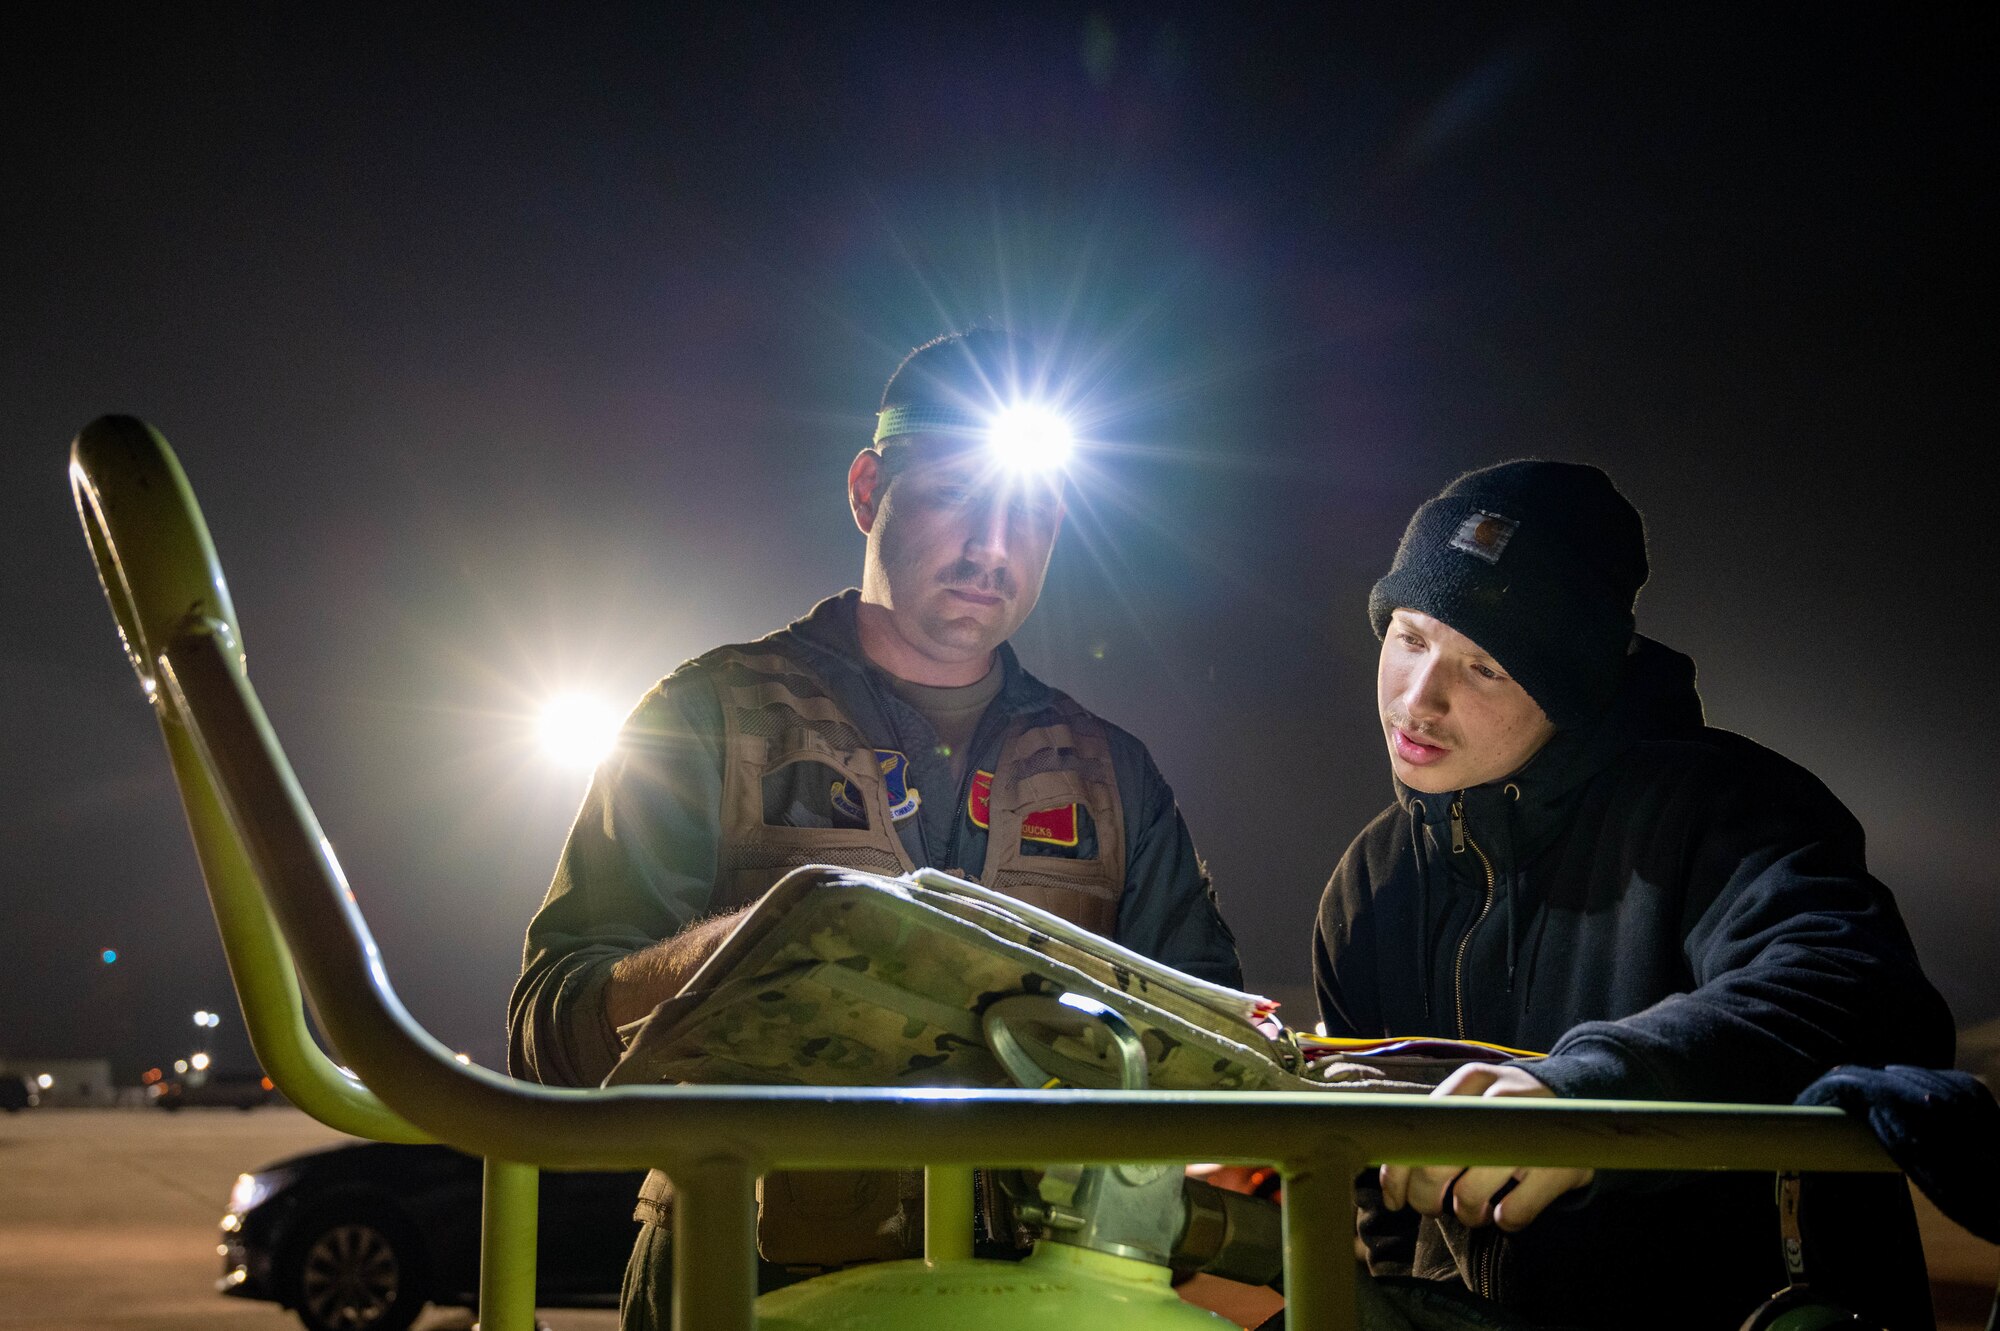 Lt. Col. Ryan Loucks, 23rd Expeditionary Bomb Squadron Commander, reads over the maintenance log with a crew chief at Morón Air Base, Spain, Mar 8, 2023. Bomber Task Force missions enable crews to maintain a high state of readiness proficiency, and validate our always-ready, global strike capability. (U.S. Air Force photo by Airman 1st Class Alexander Nottingham)